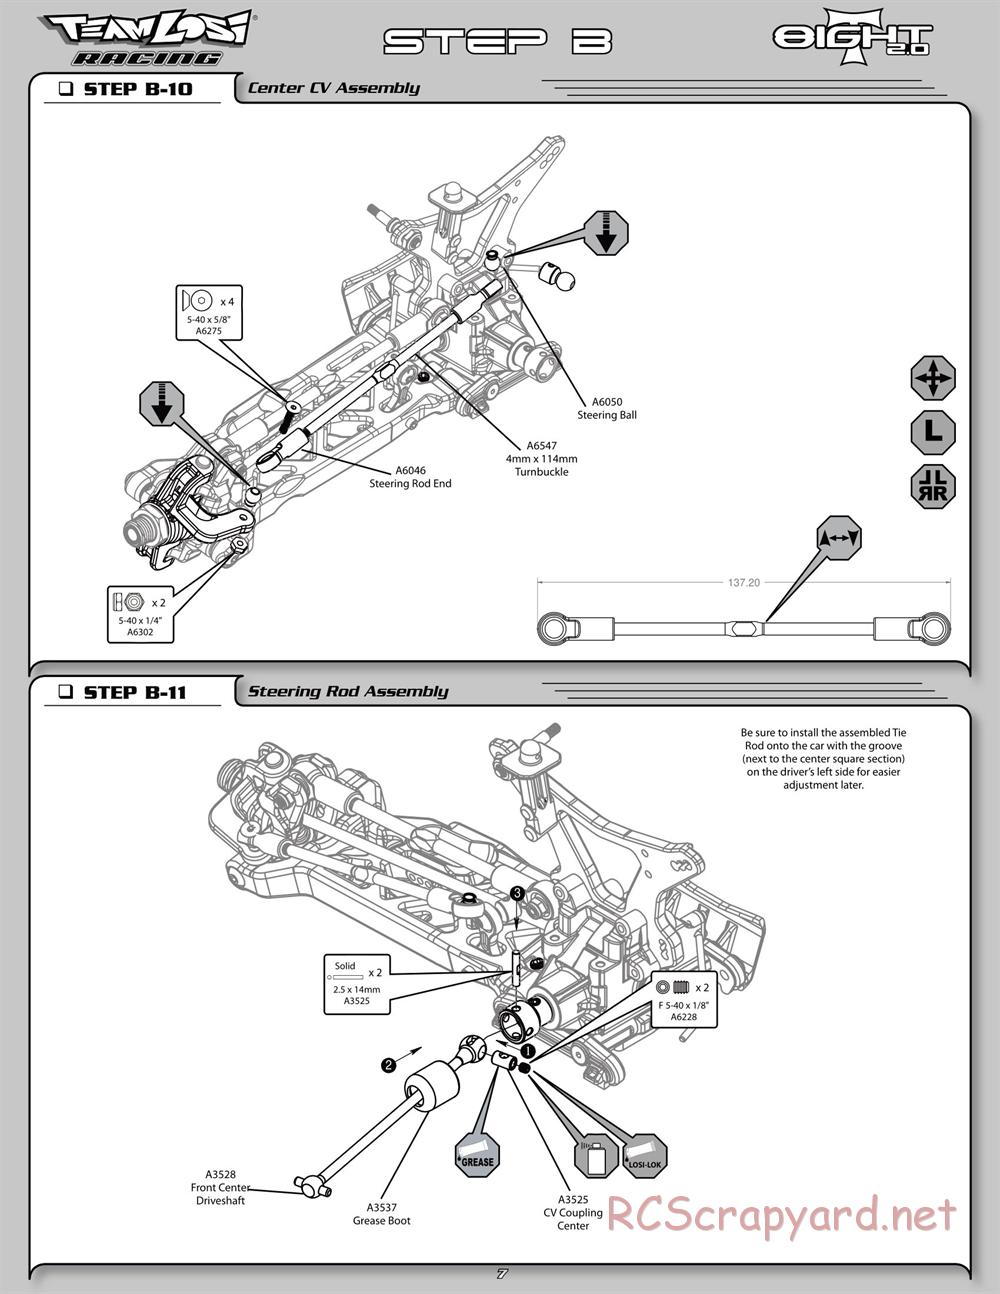 Team Losi - 8ight-T 2.0 Race Roller - Manual - Page 12